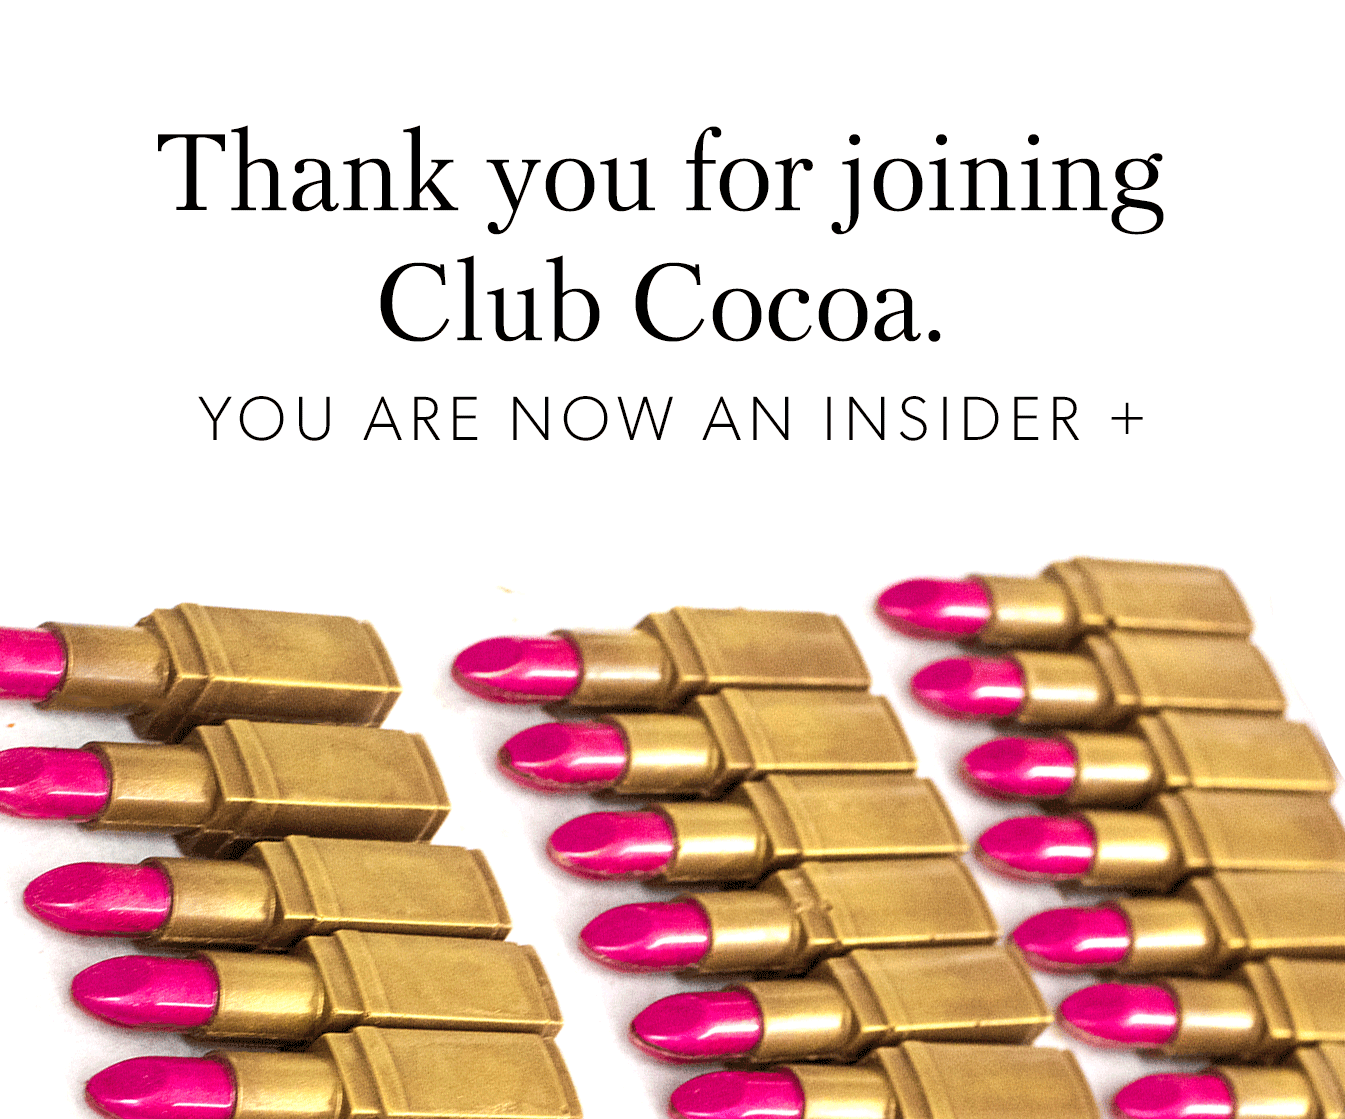 Thank you for joining Club Cocoa!